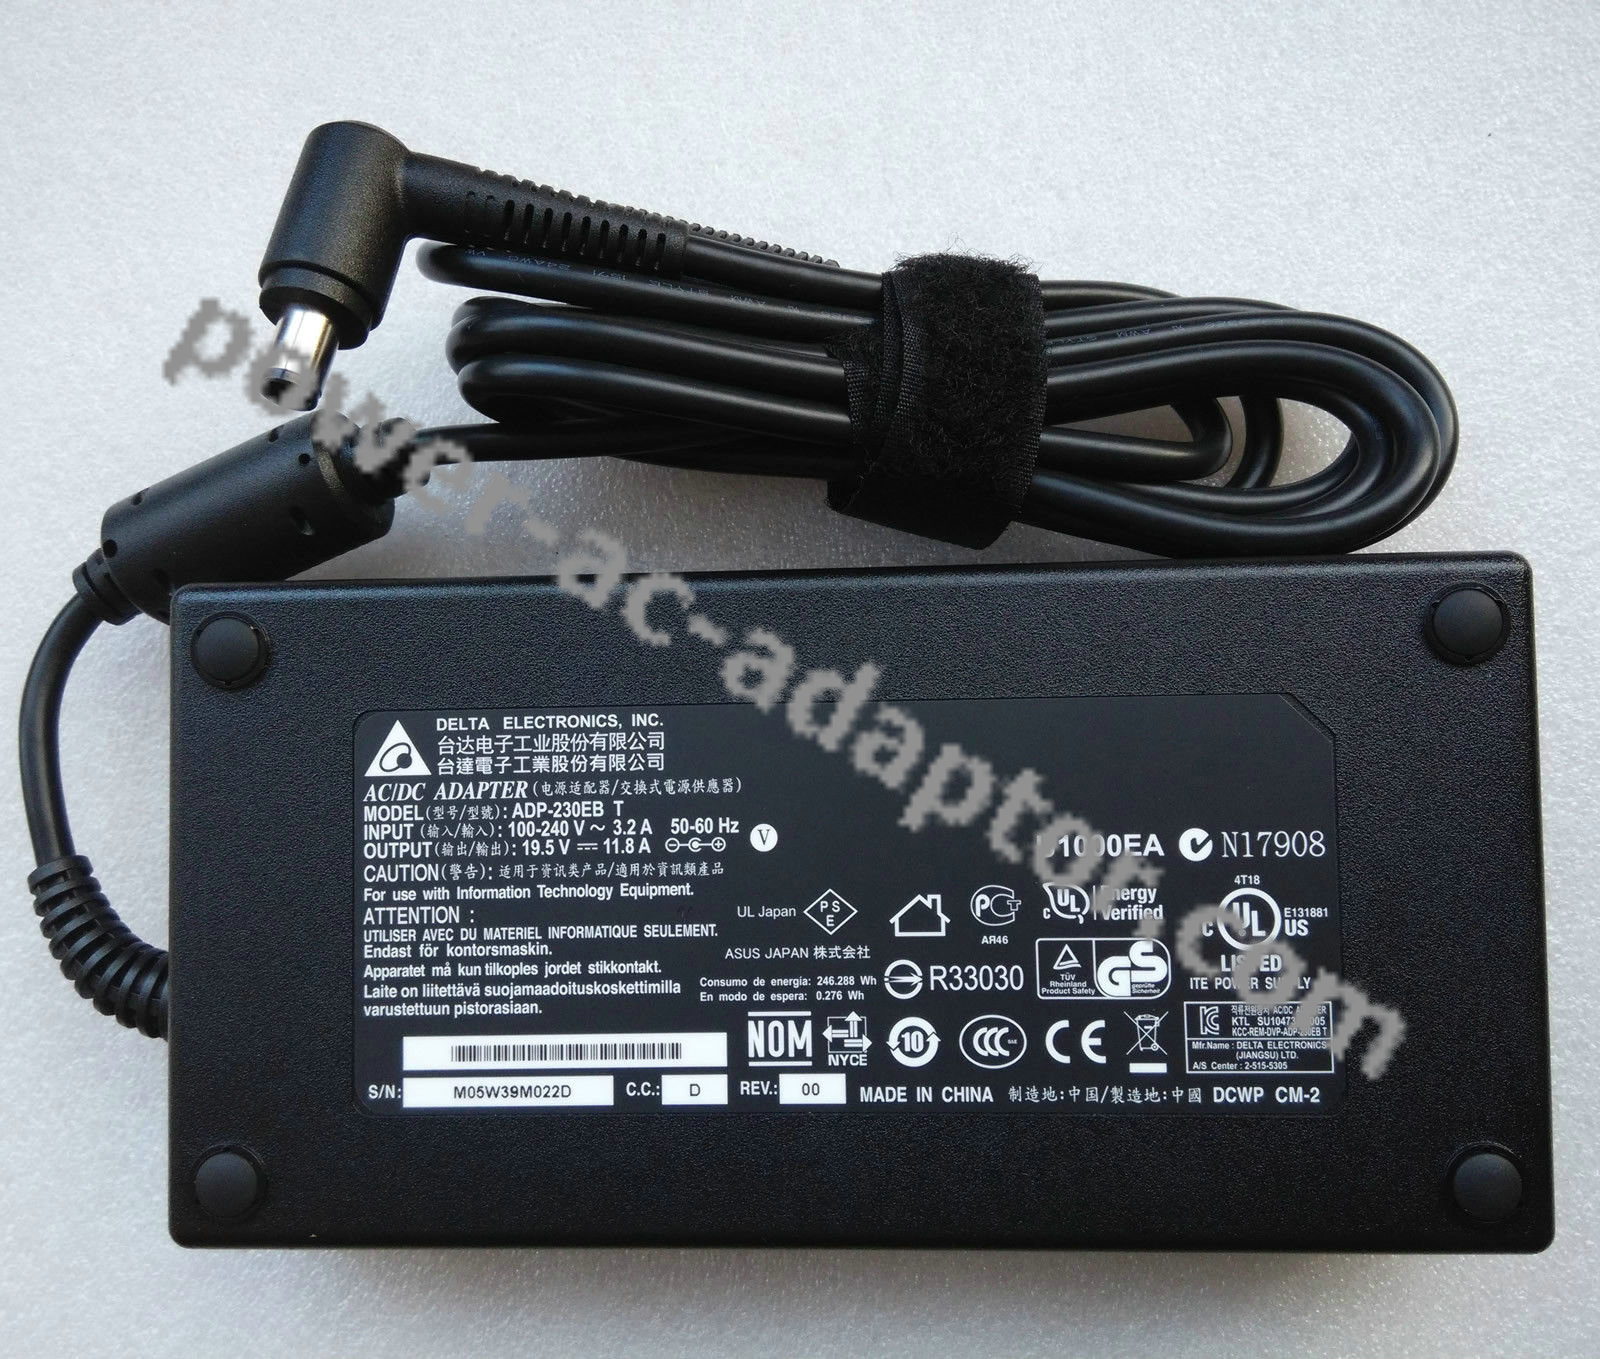 19.5V 11.8A ASUS SADP-230AB D NW230-01 power AC Adapter